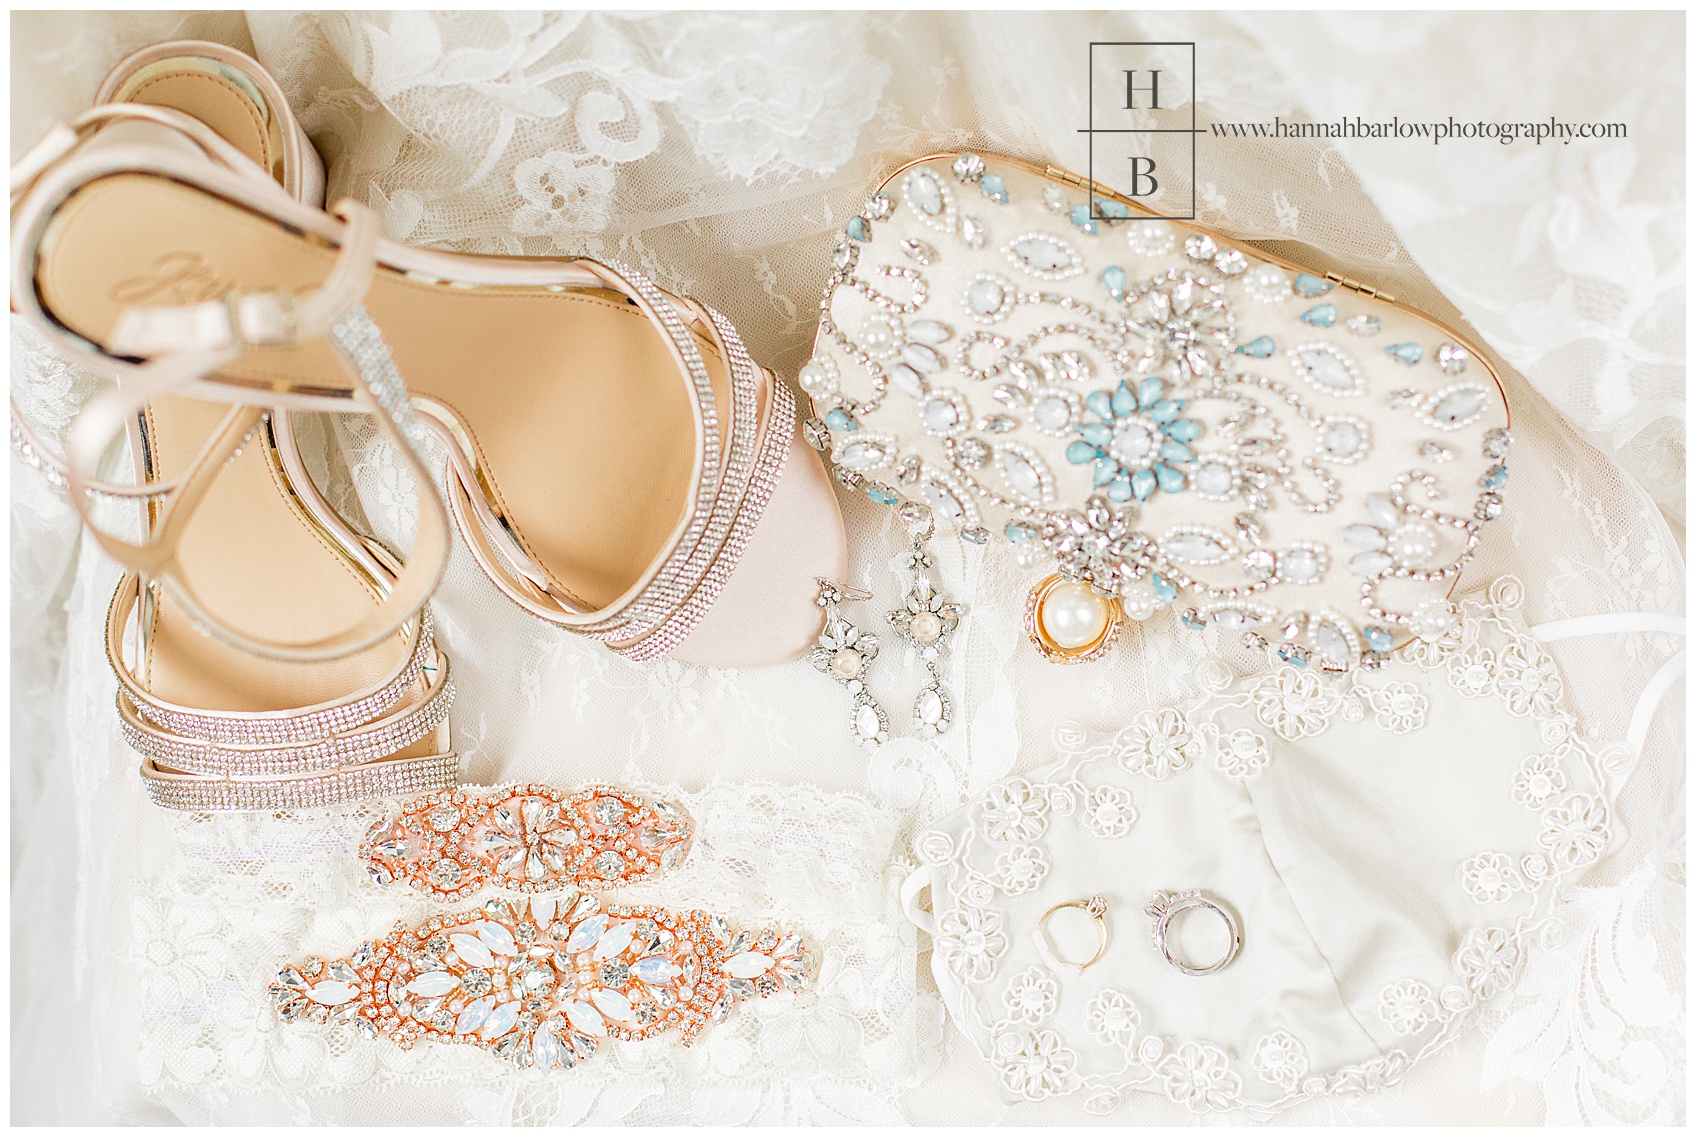 Bridal Wedding Details in Ivory with COVID Face Mask